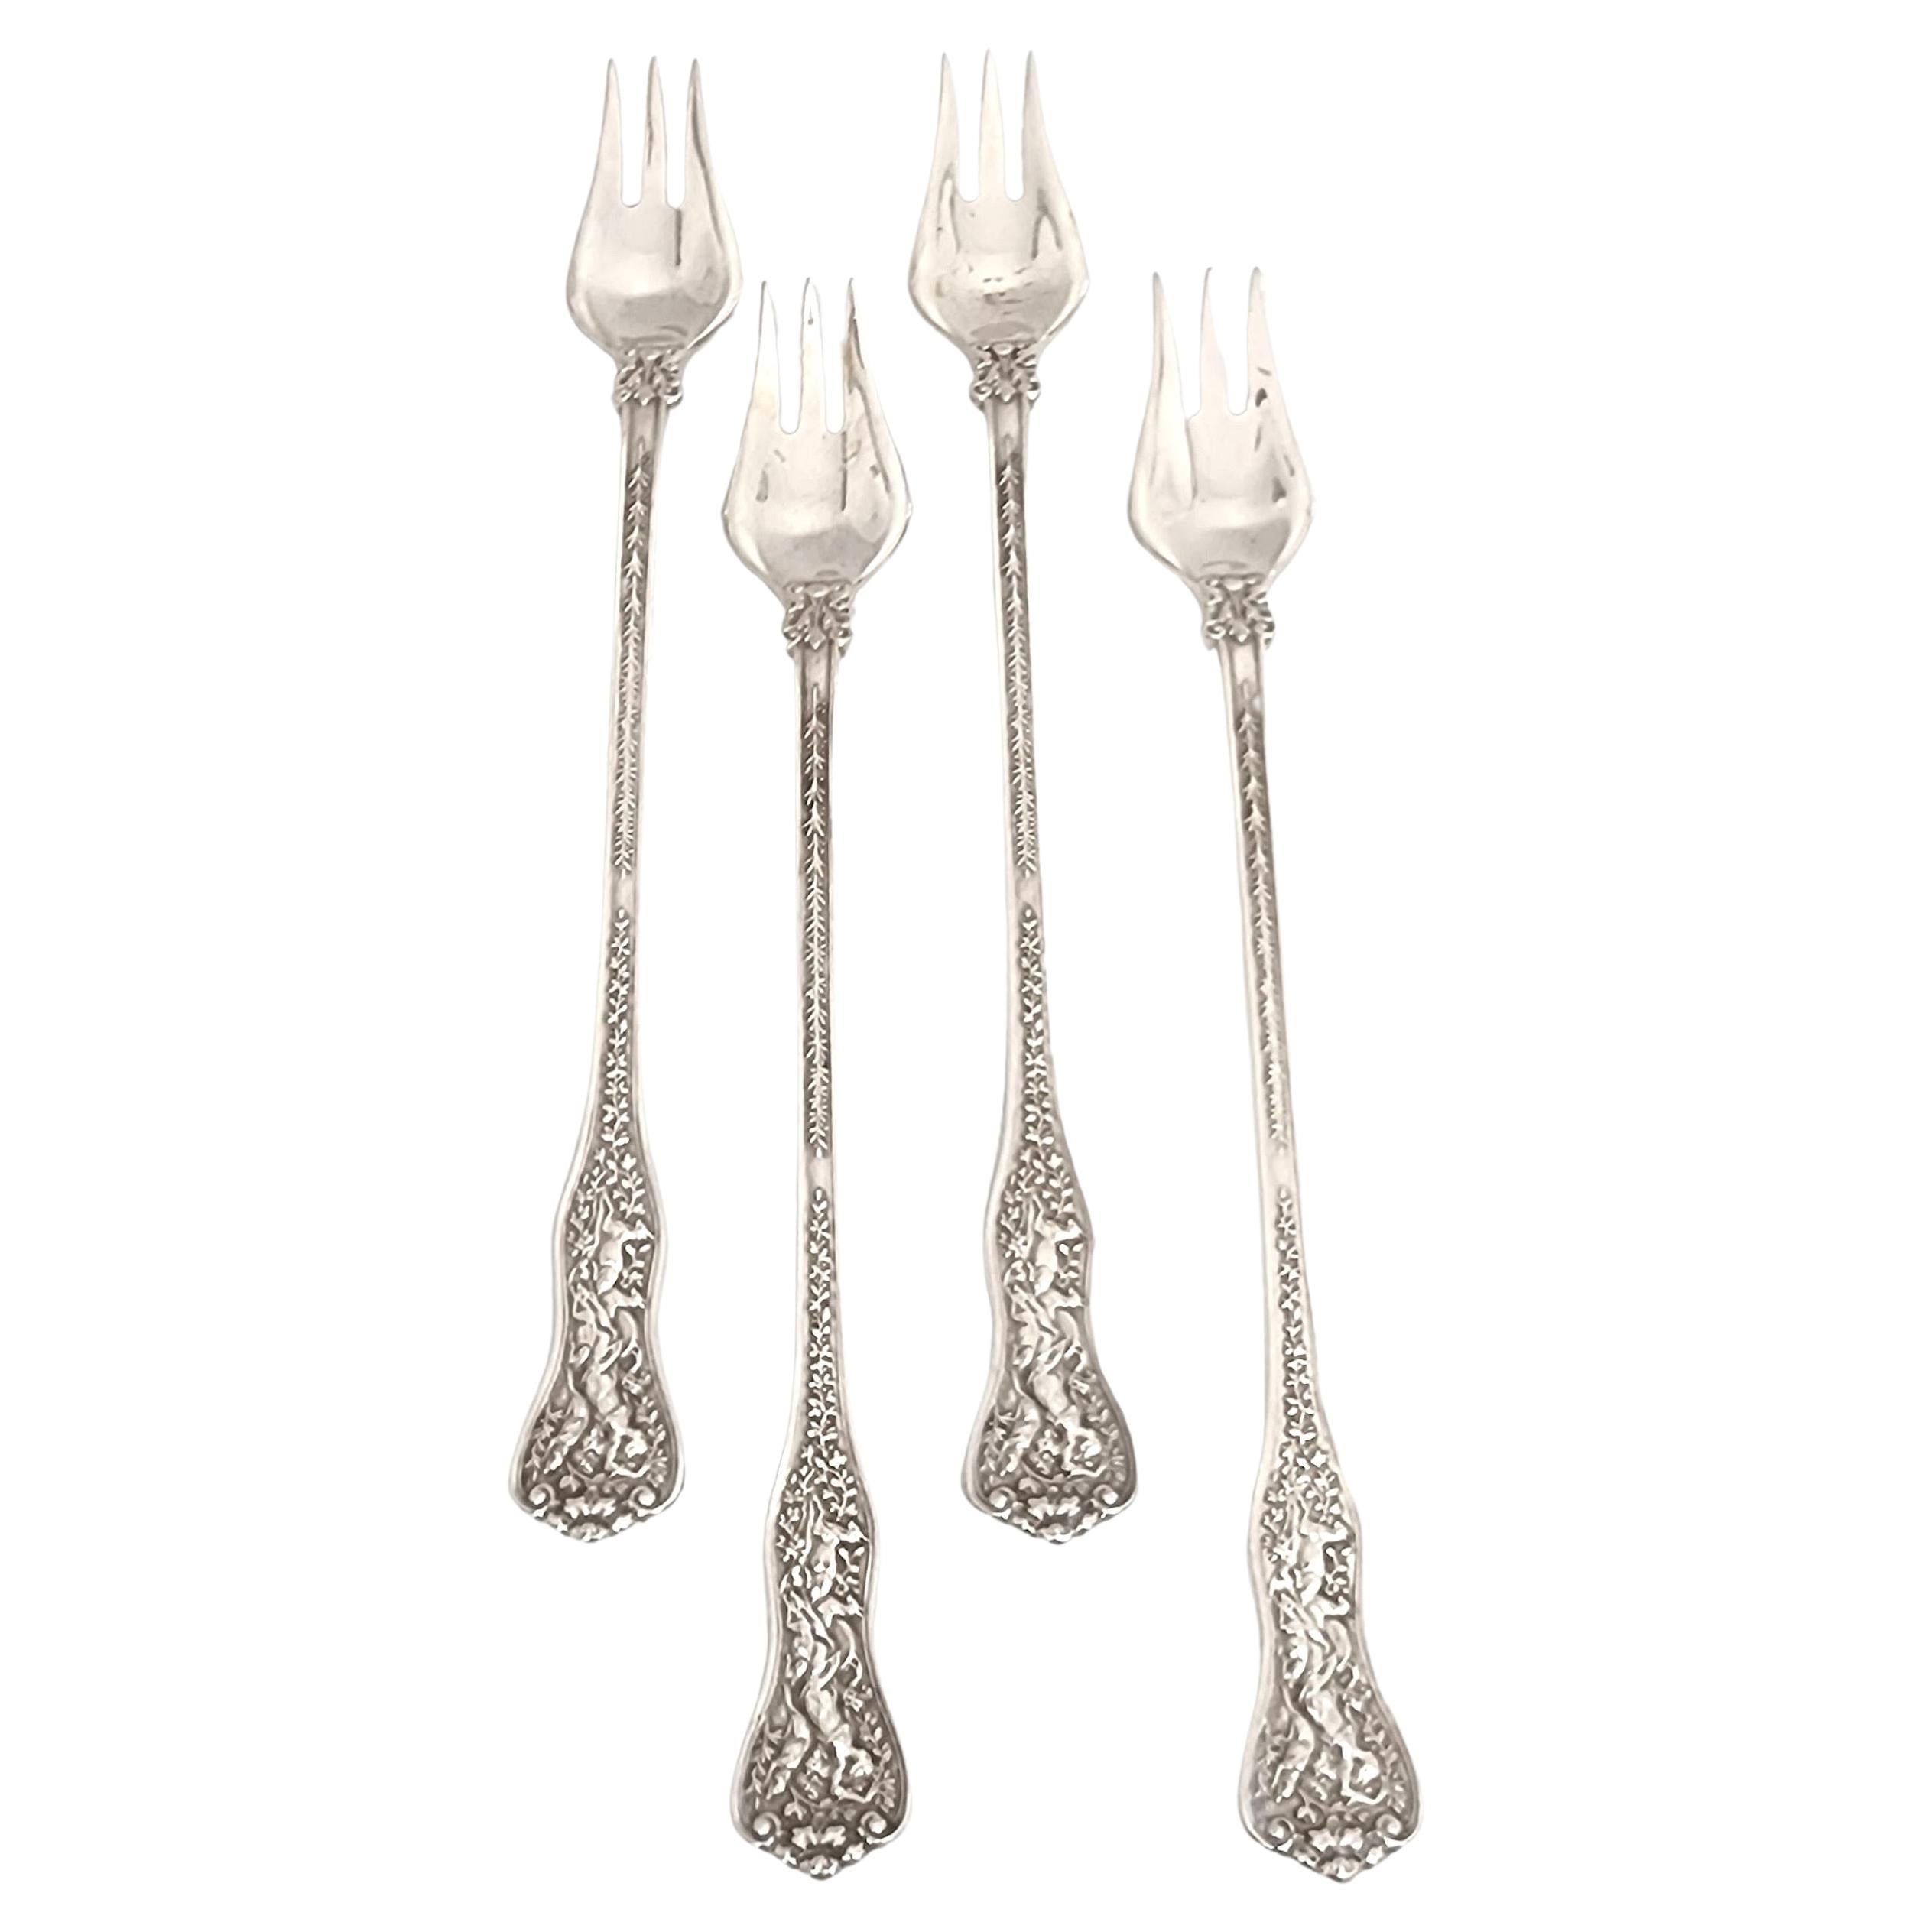 Set of 4 Tiffany & Co Sterling Silver Olympian Cocktail/Oyster Forks